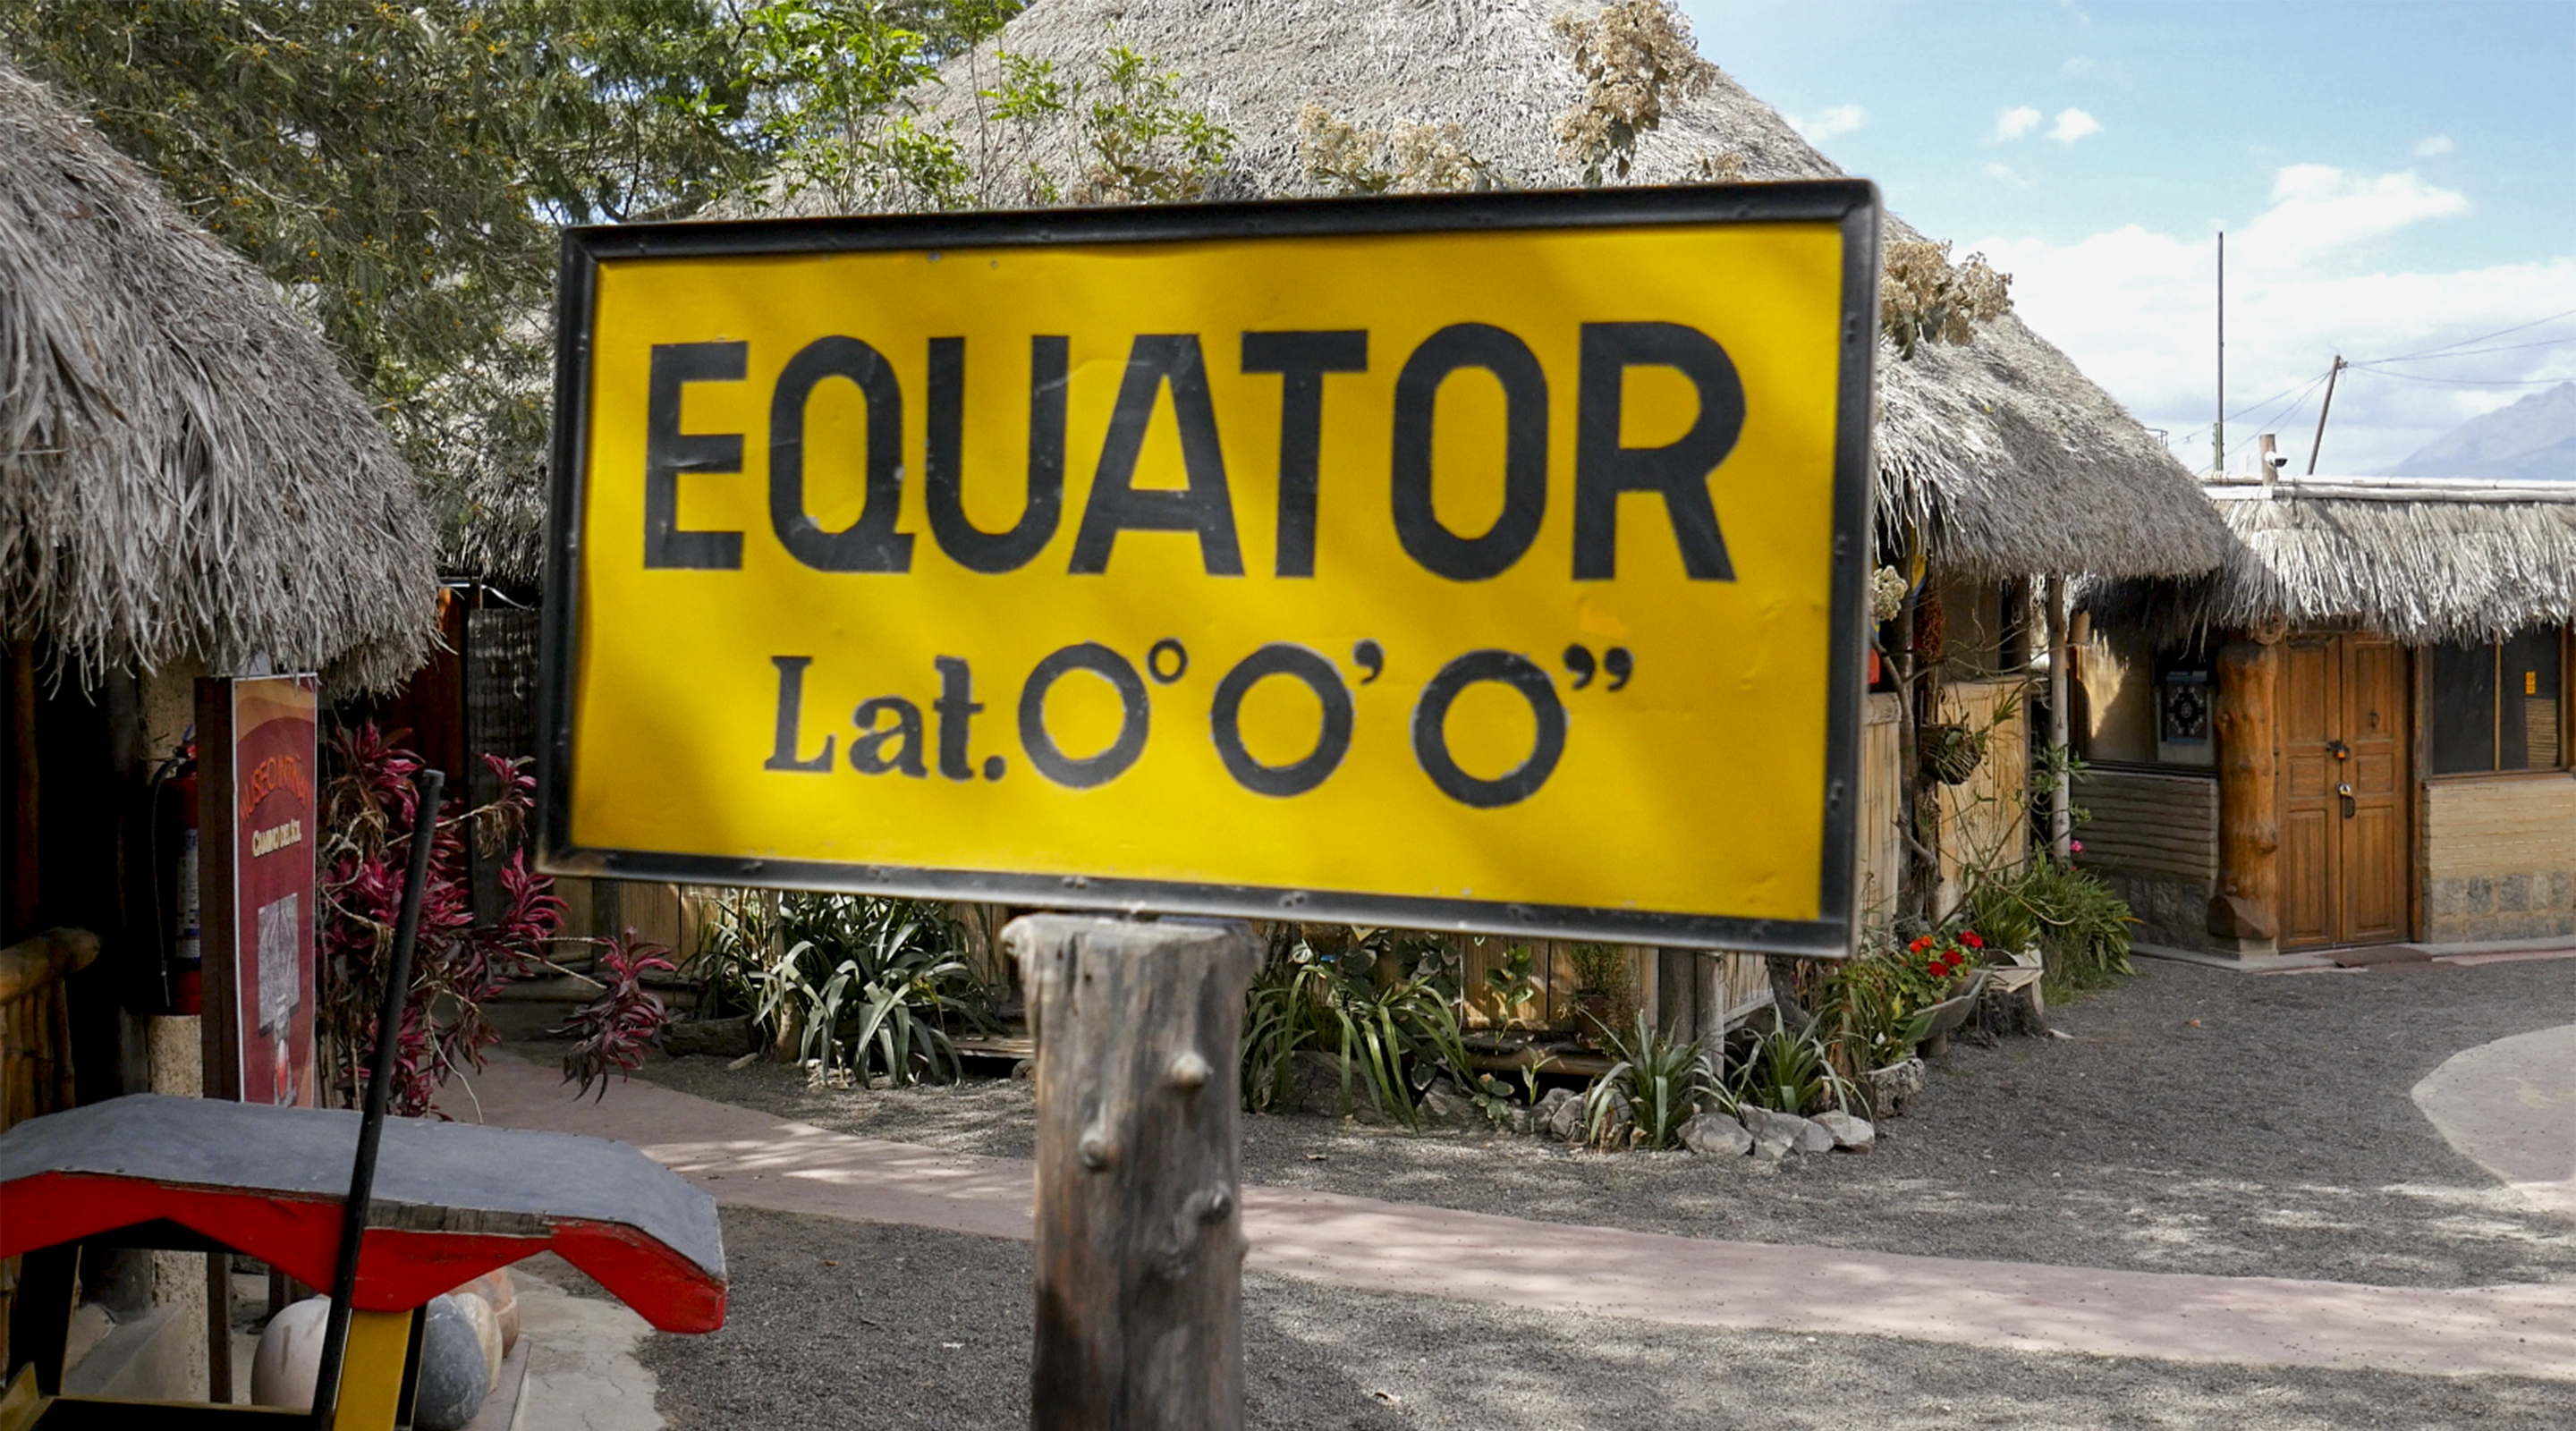 The exact location of the equator is sometimes debated.